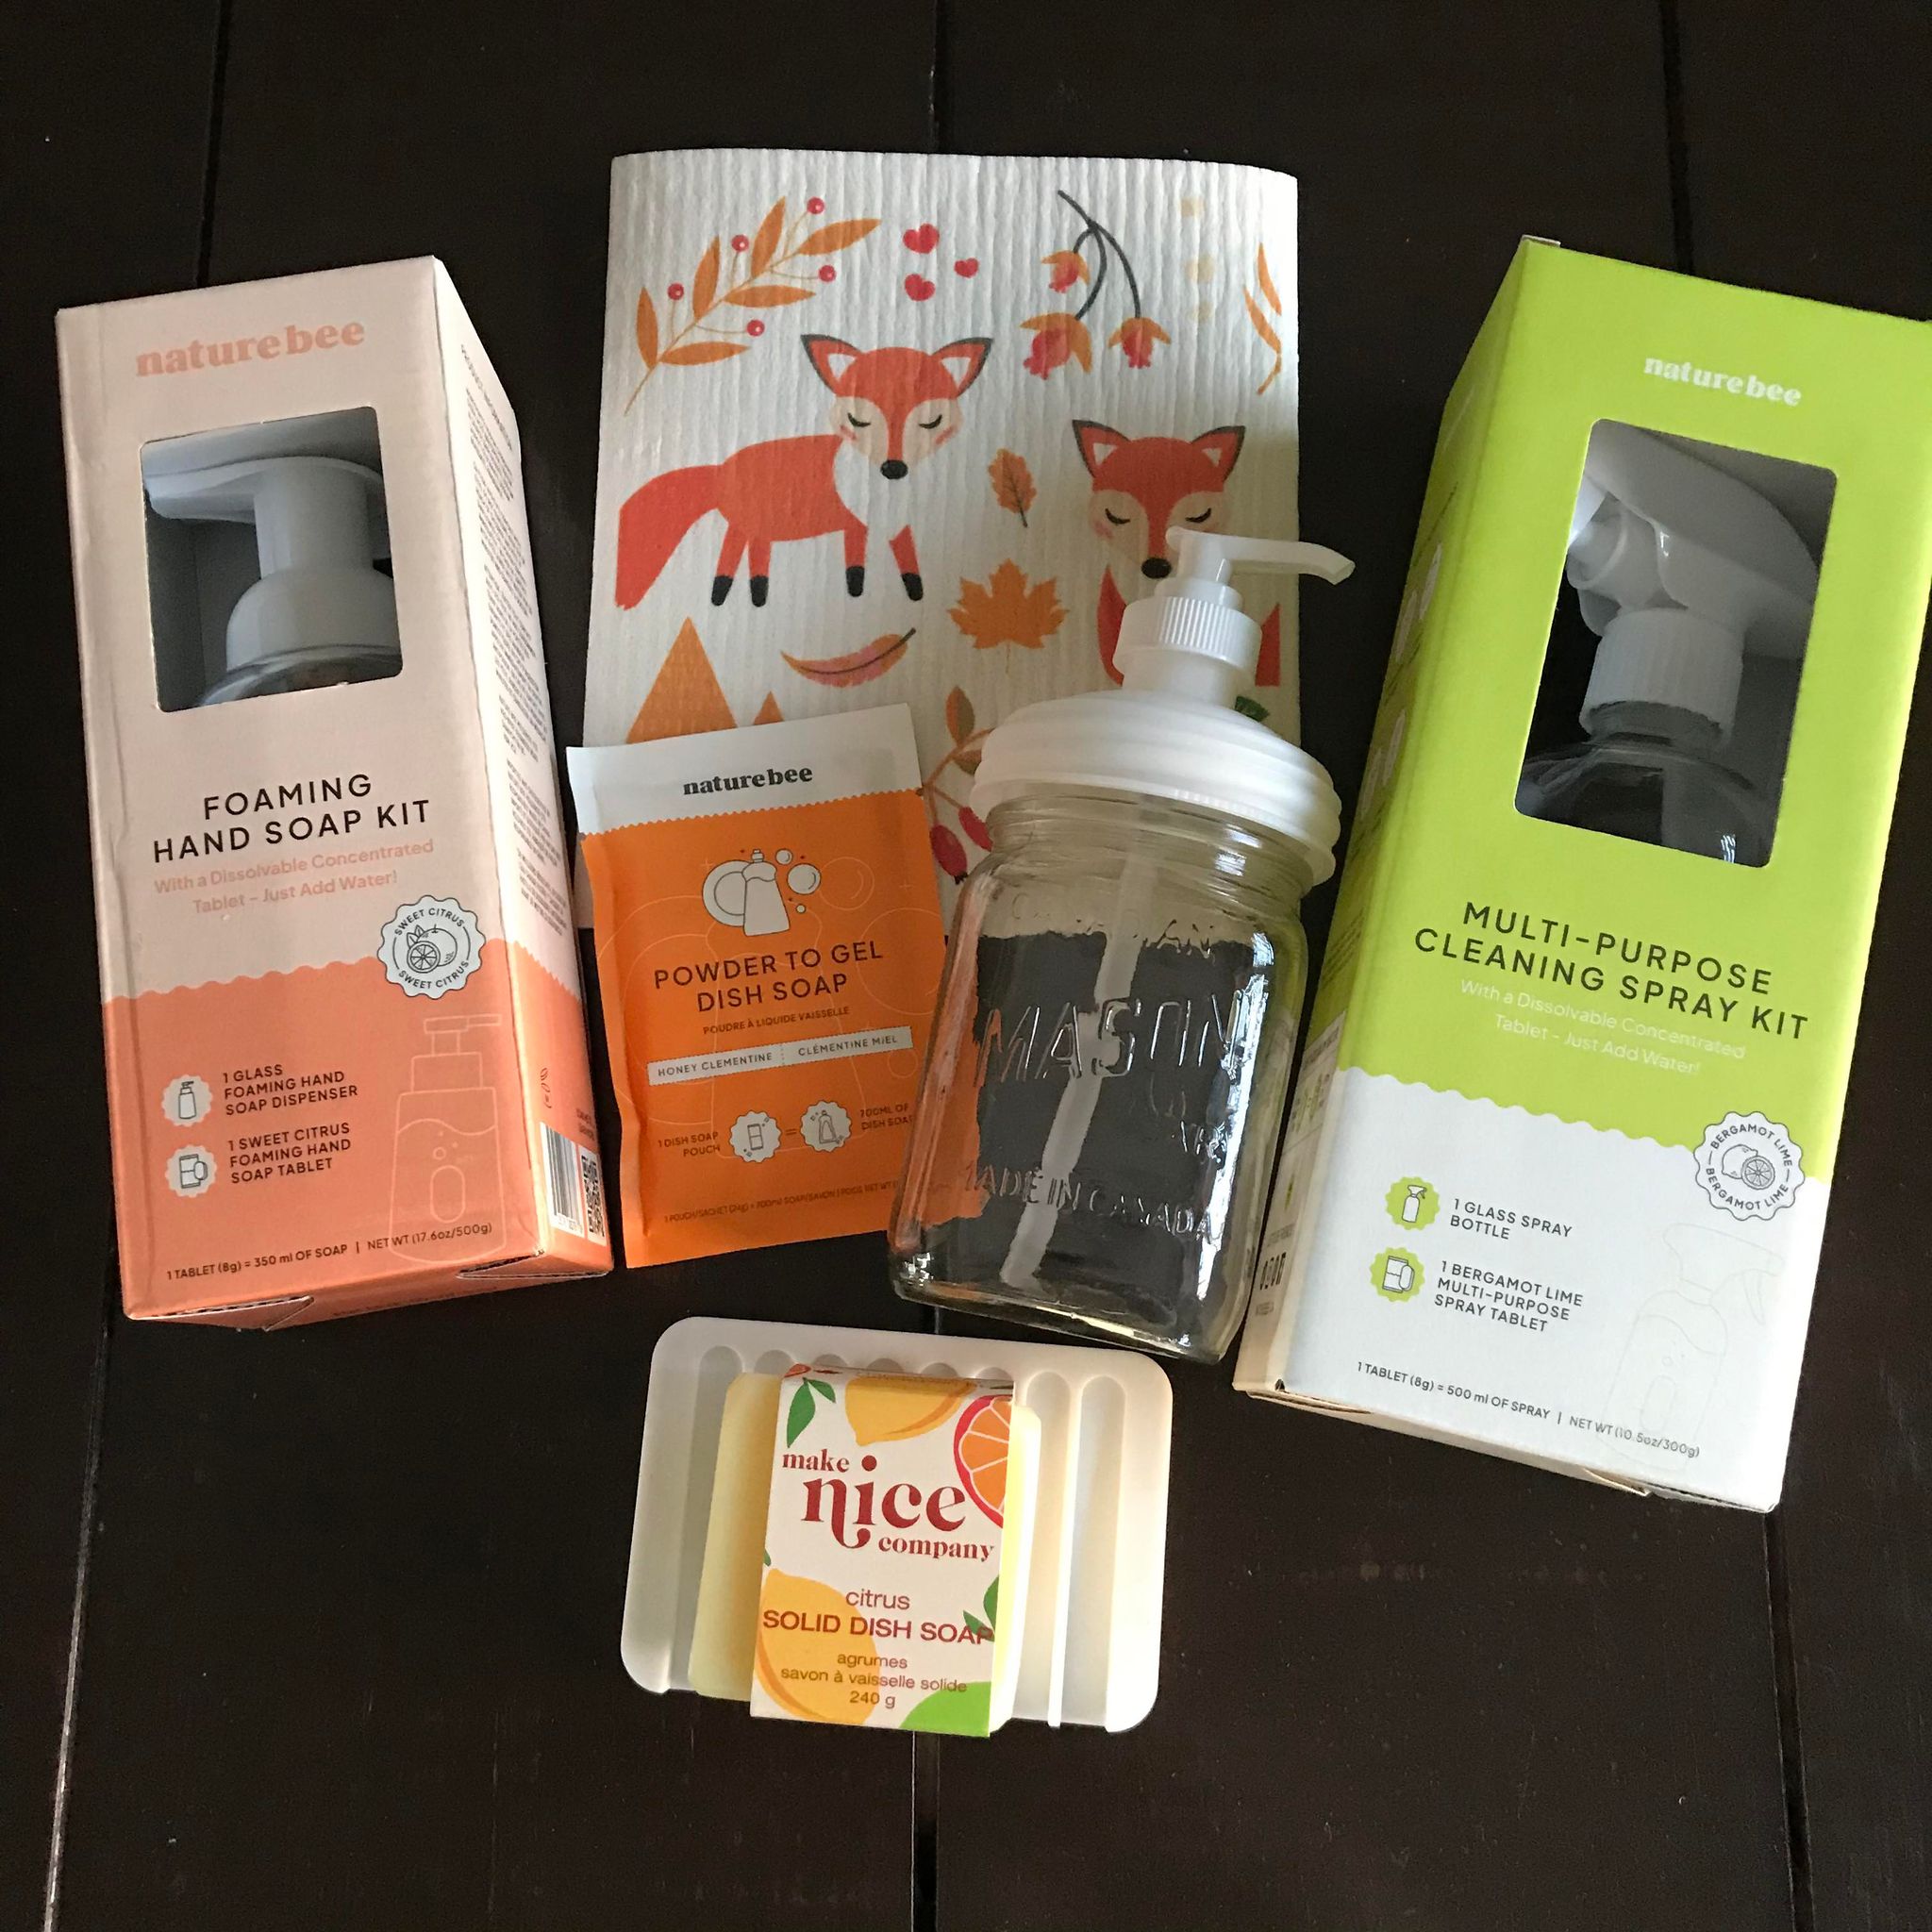 Included in this zero waste kitchen set is a dish soap block (citrus), a white silicone soap dish, foaming hand soap kit (sweet citrus), a powder to gel dish soap (honey clementine),  a vintage Canadian mason with pump top, Swedish sponge cloth (in a festive pattern) and a multi-purpose cleaning spray kit (bergamot lime).